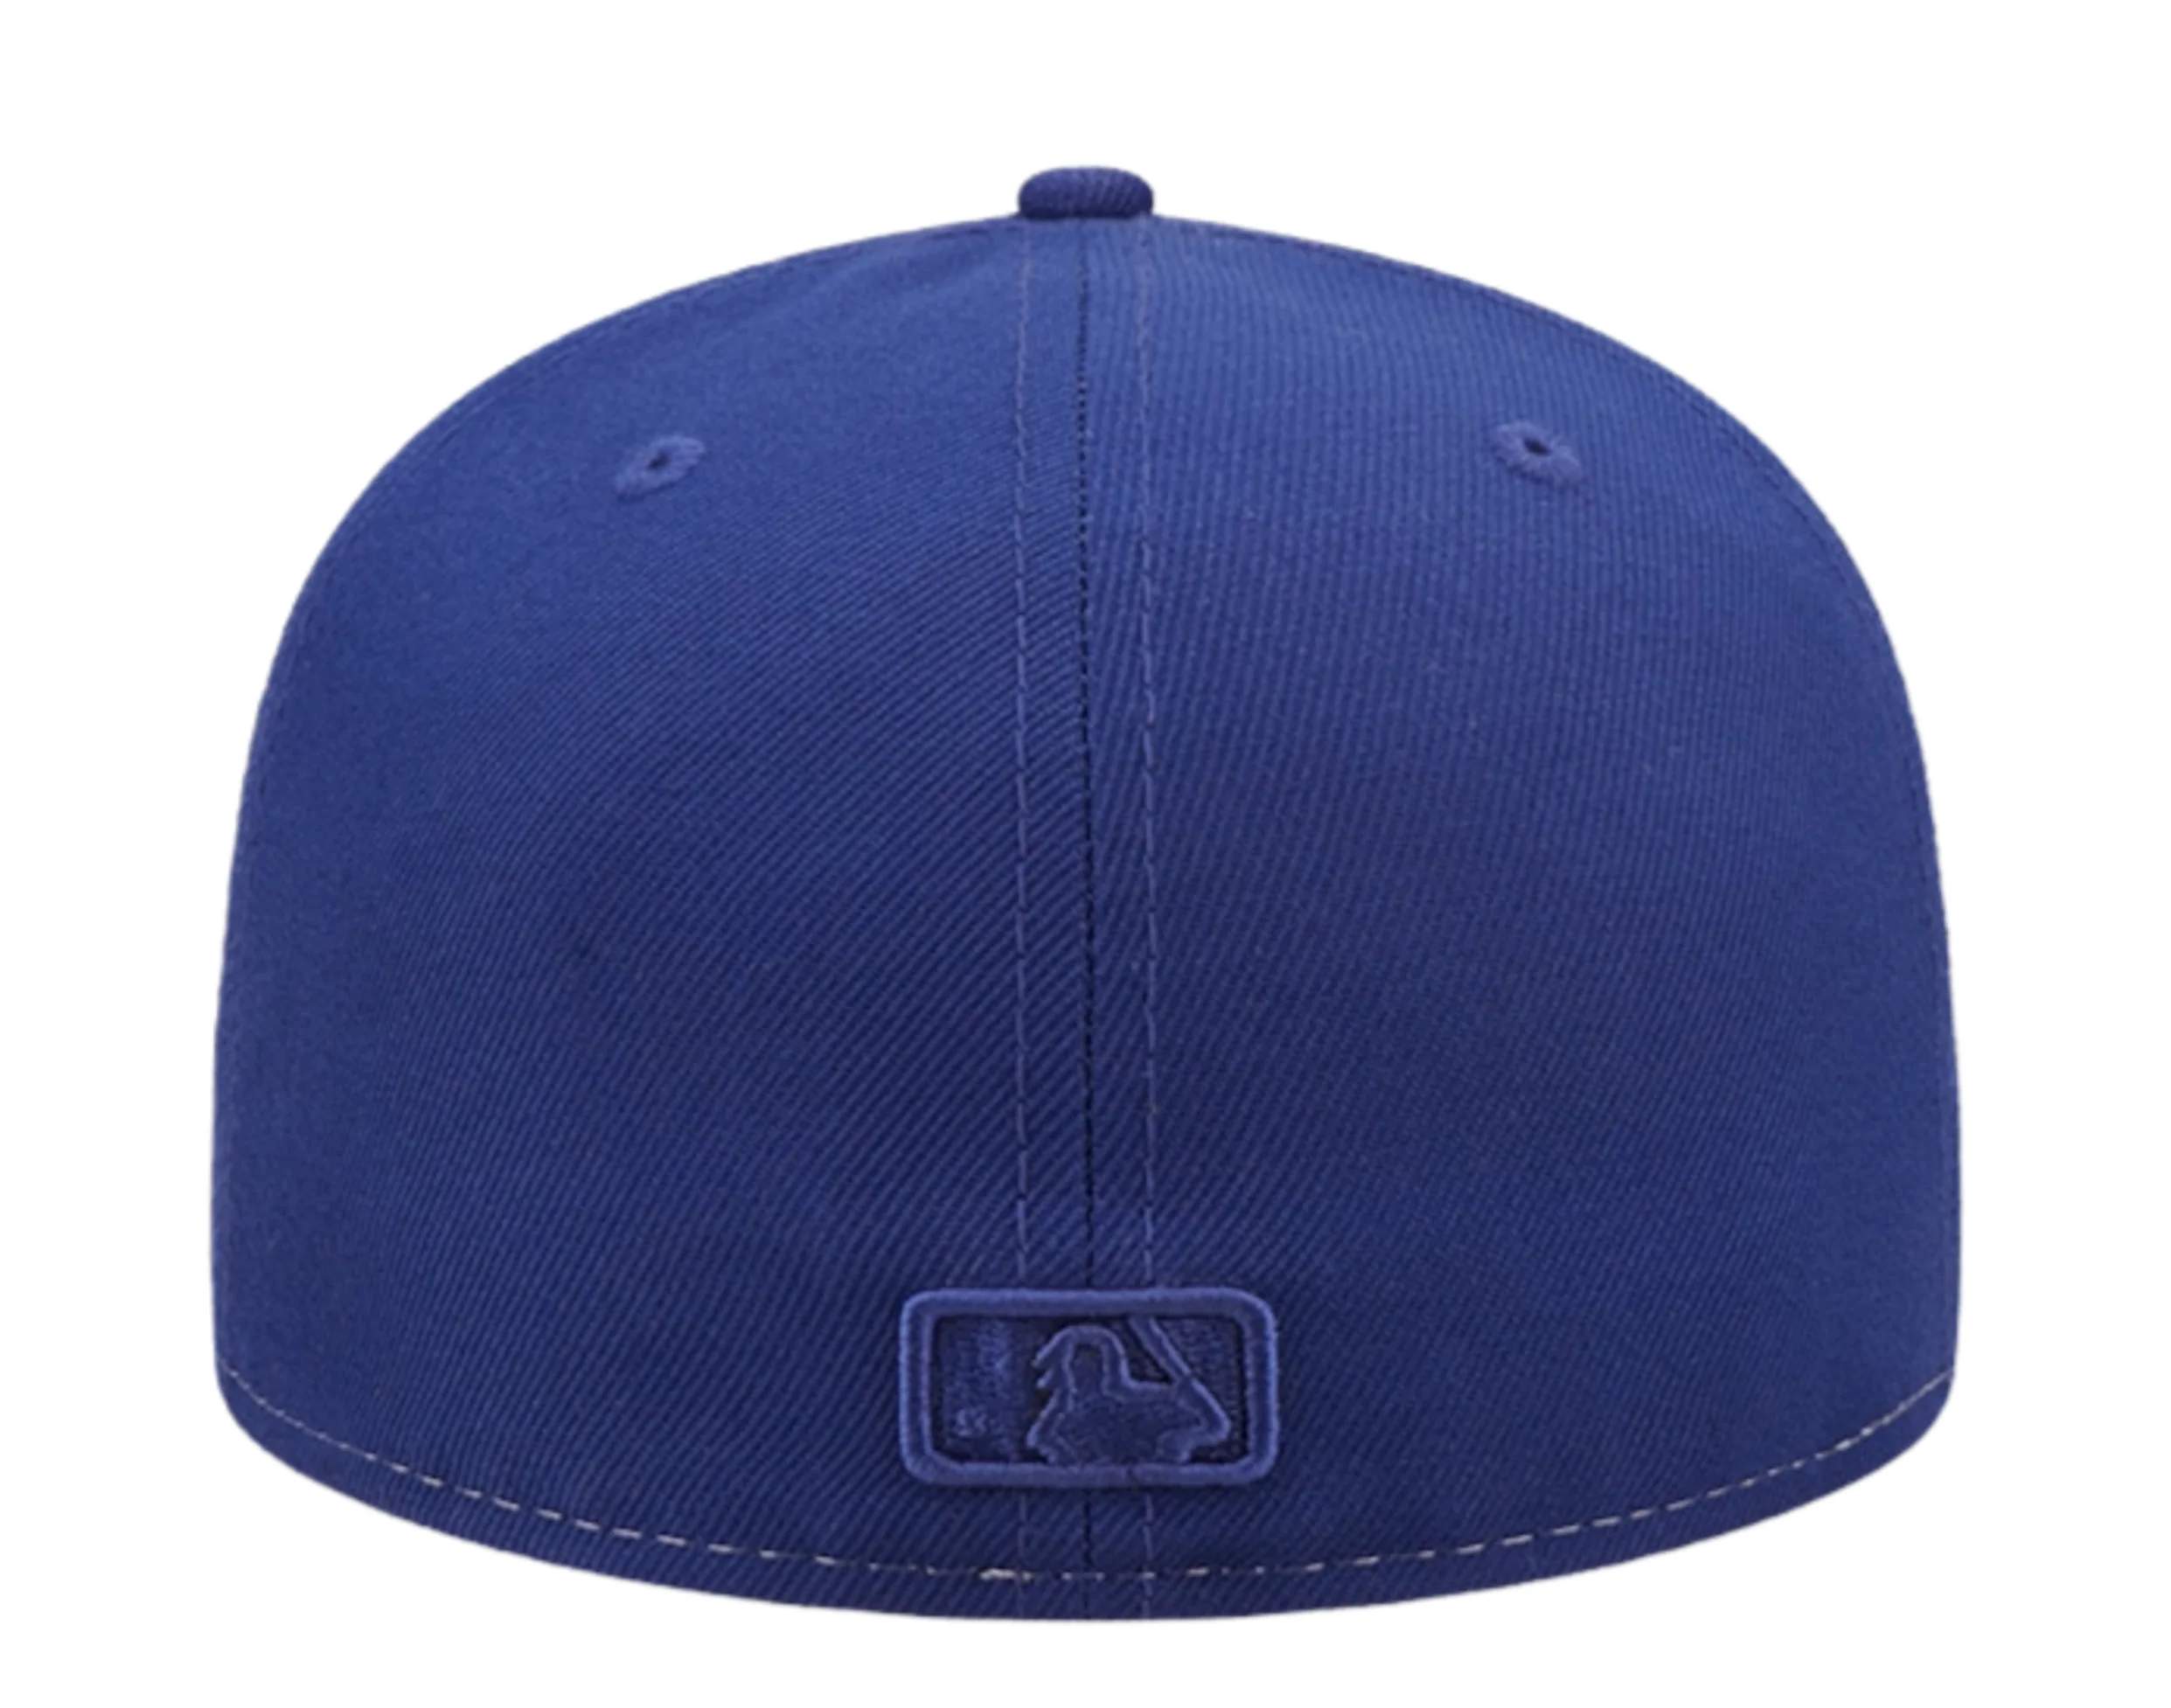 NEW ERA LOS ANGELES DODGERS 2-TONE 59FIFTY FITTED HAT-BLUE/CREAM